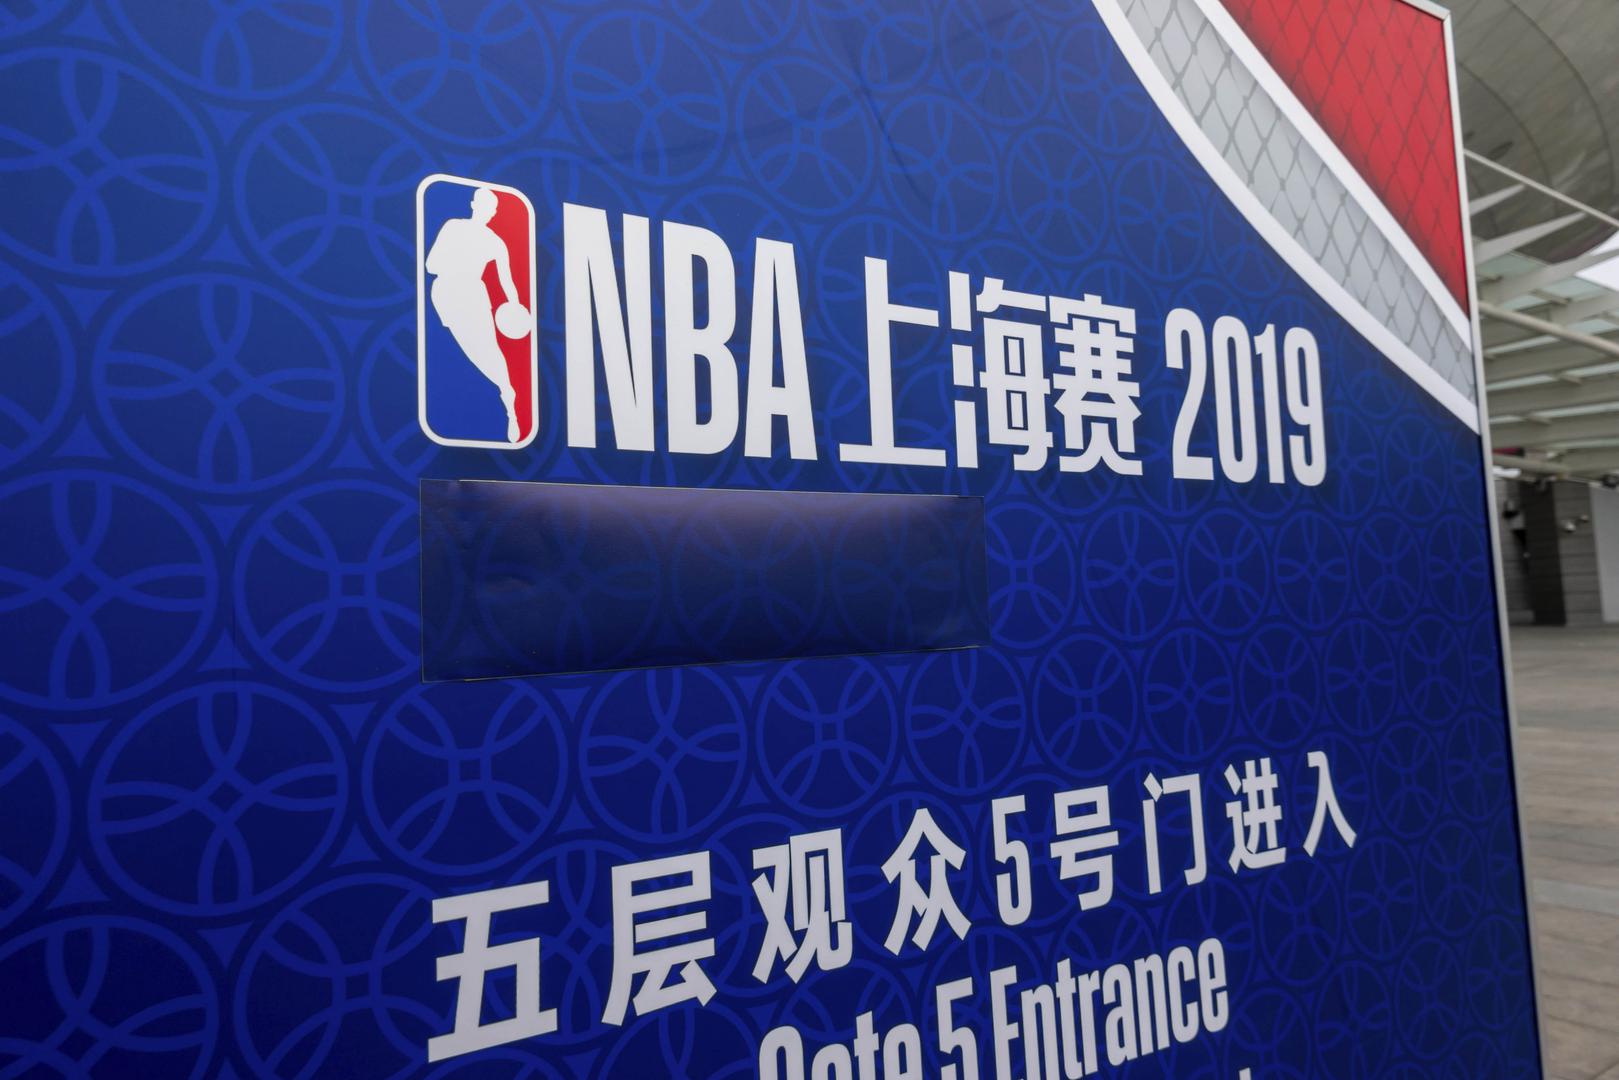 After the dustup around a tweet by general manager of the NBA’s Houston Rockets, Daryl Morey, workers removed sponsor stands in front of Mercedes-Benz Arena in Shanghai, ahead of the Los Angeles Lakers and Brooklyn Nets game.